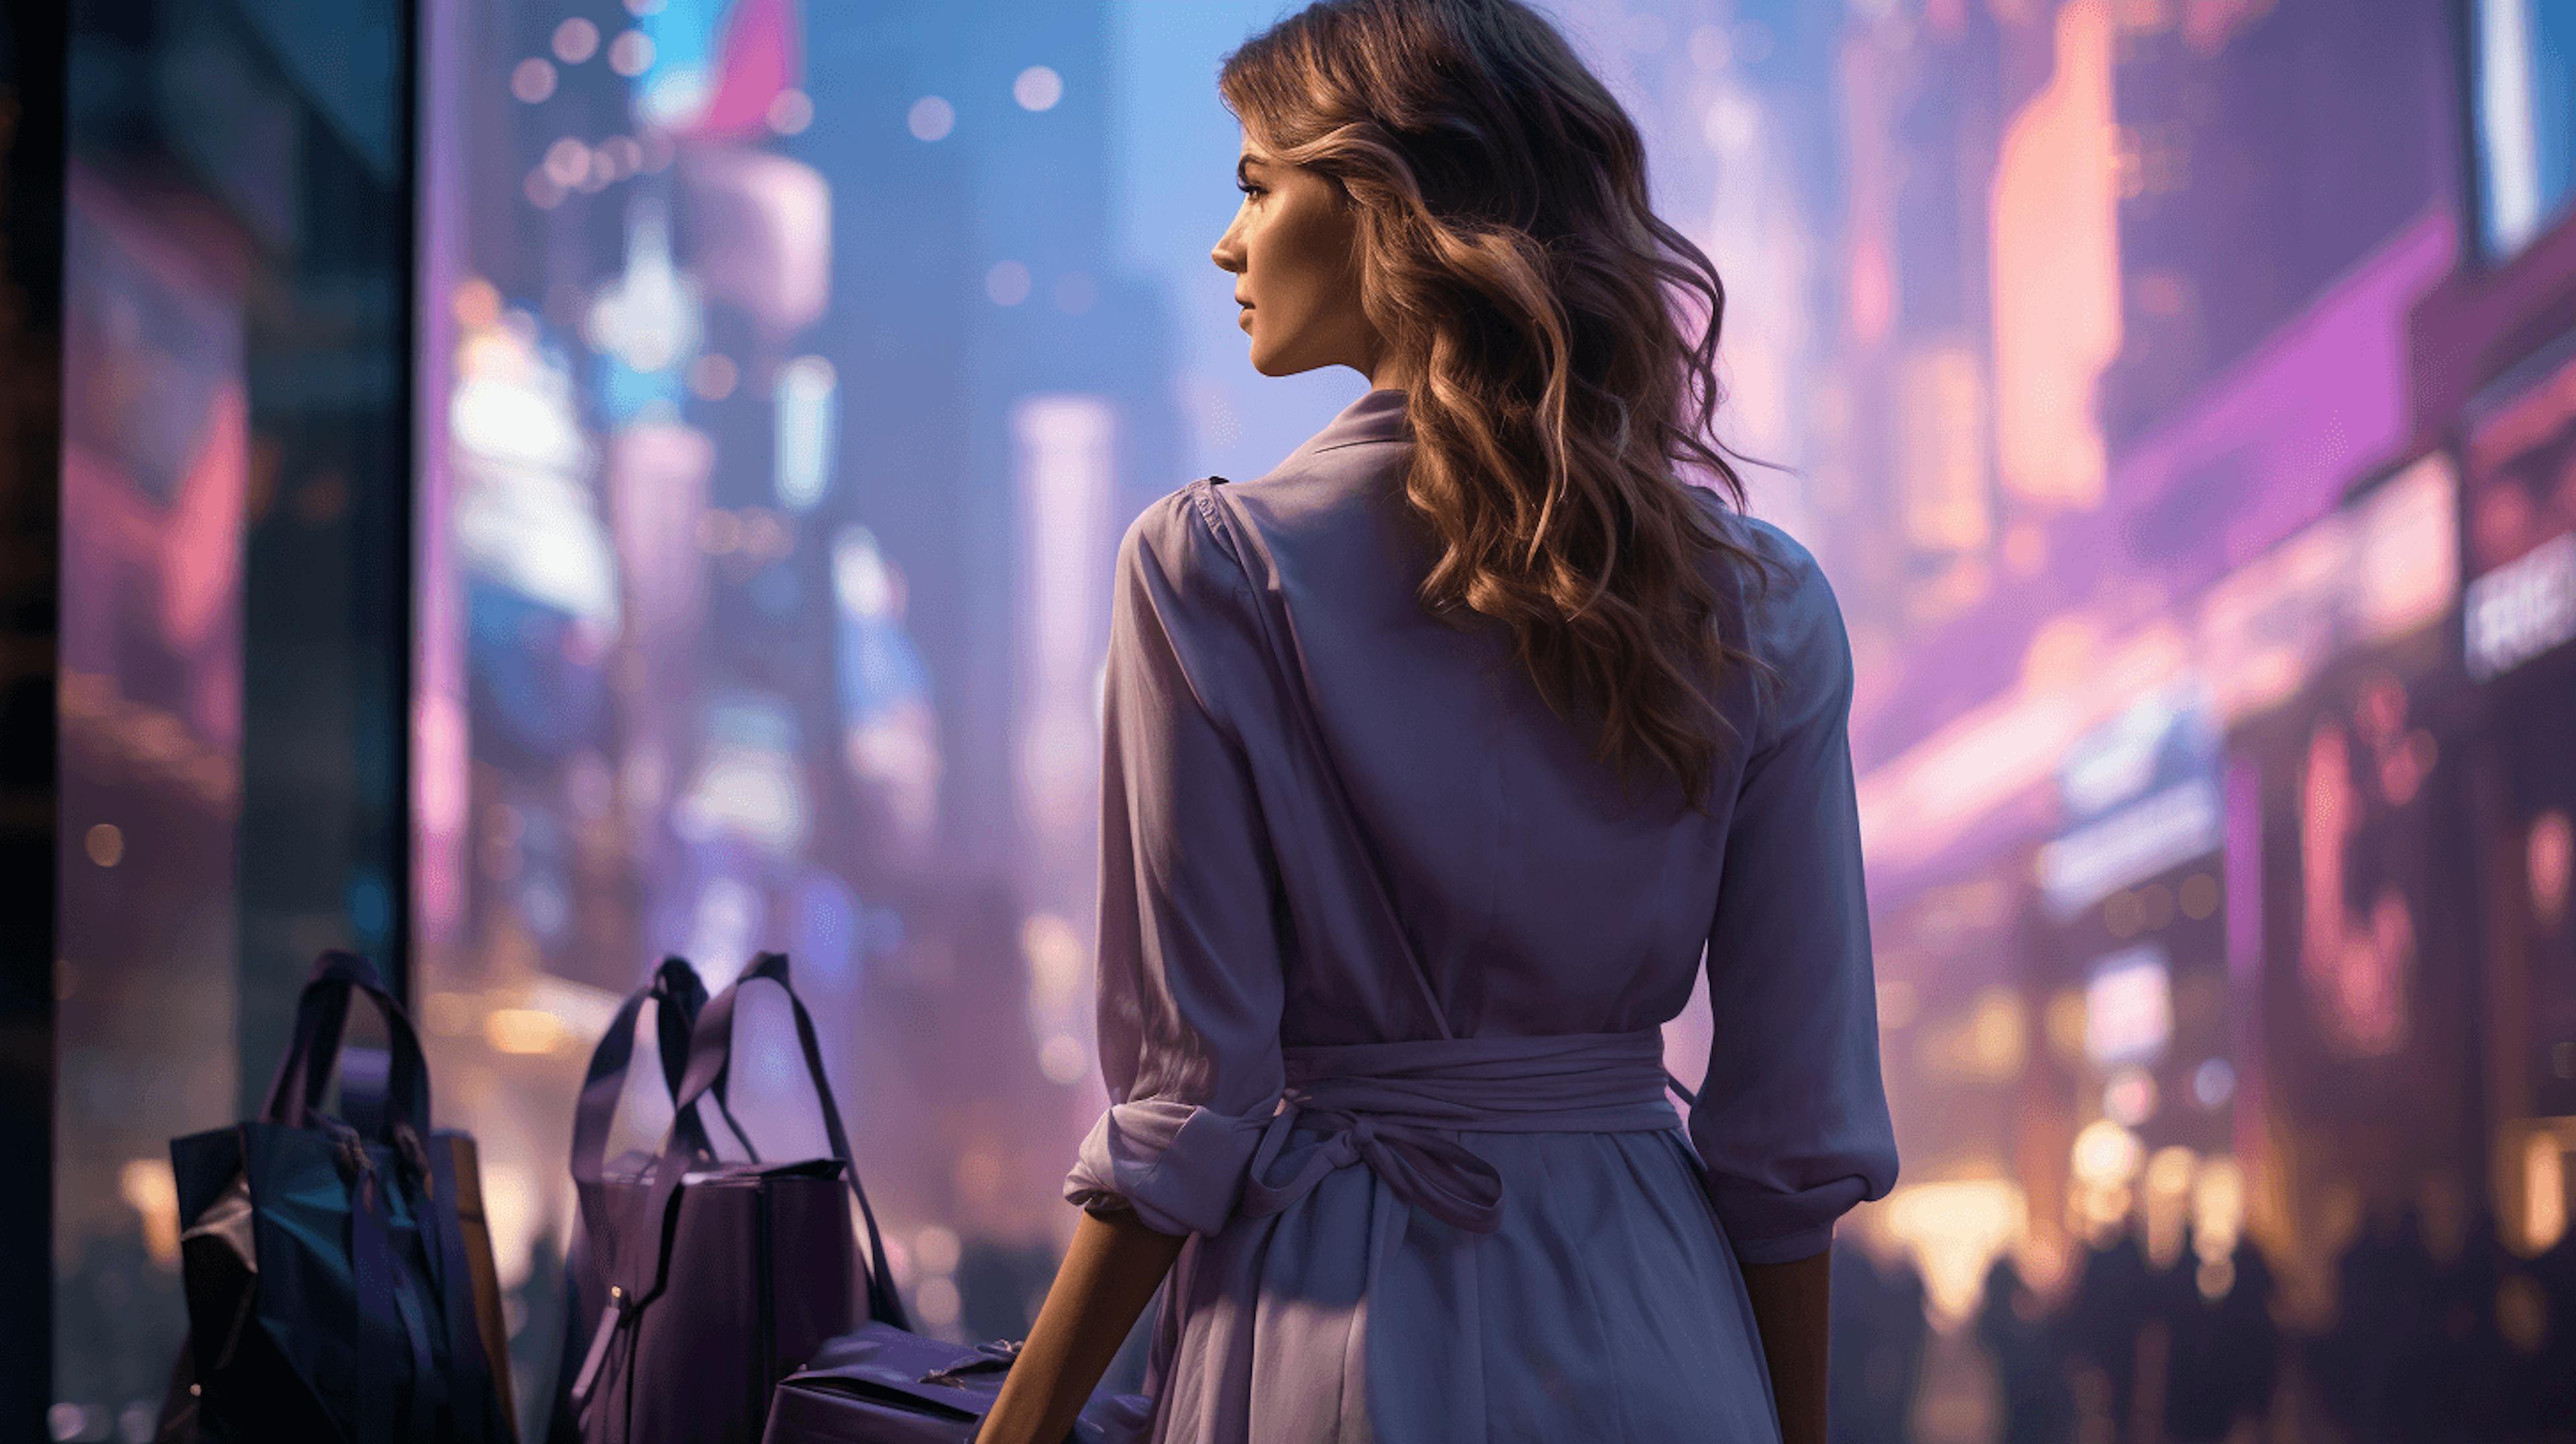 a woman in a dress walking through the city at night